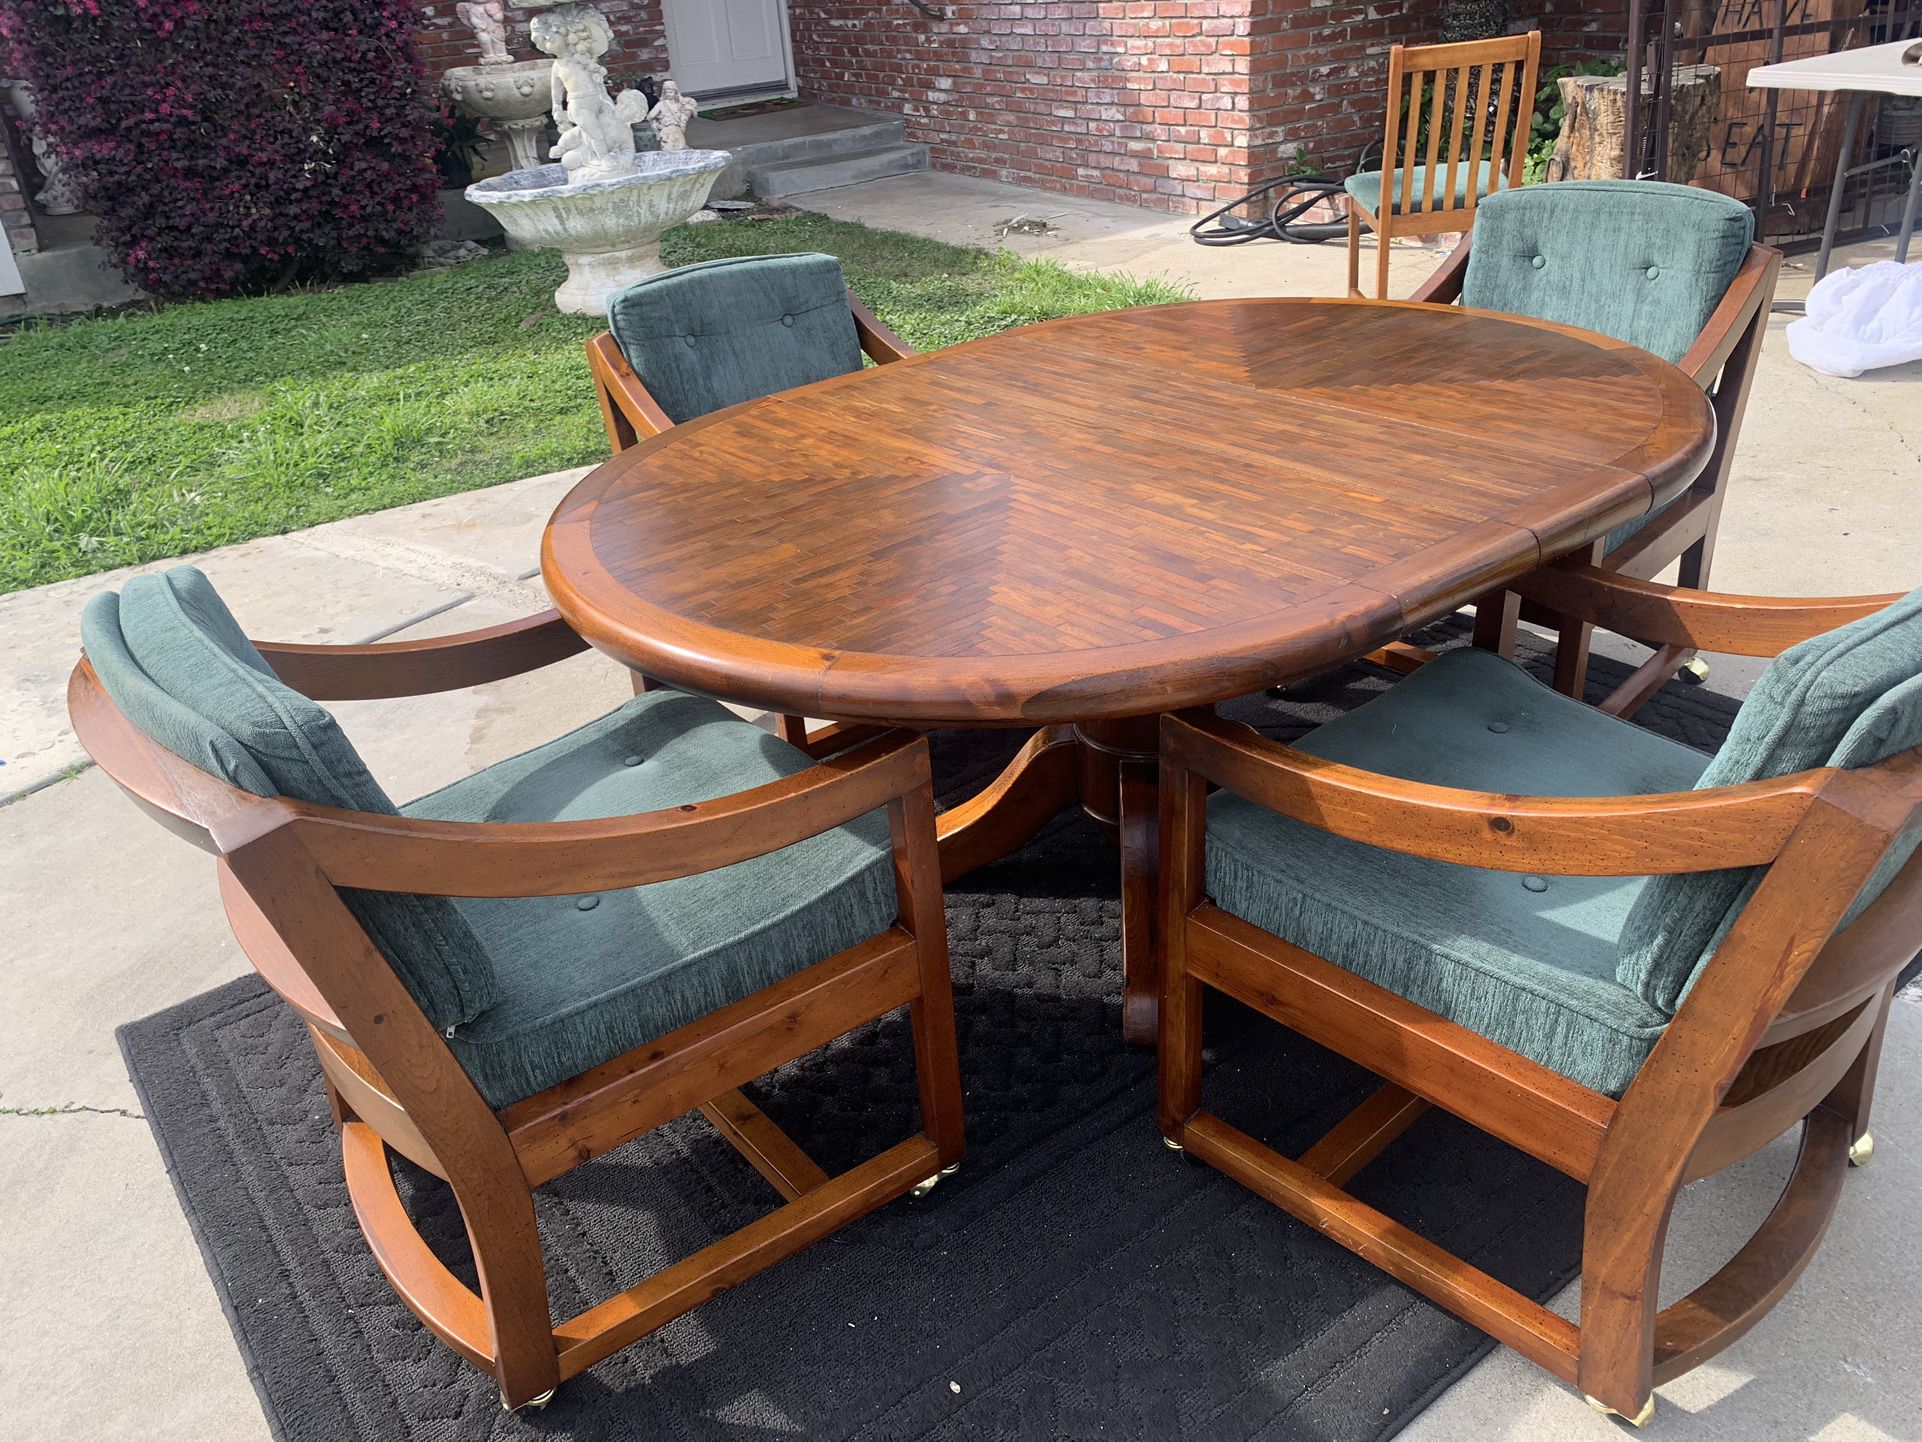 Vintage Dining Room Table /Chairs